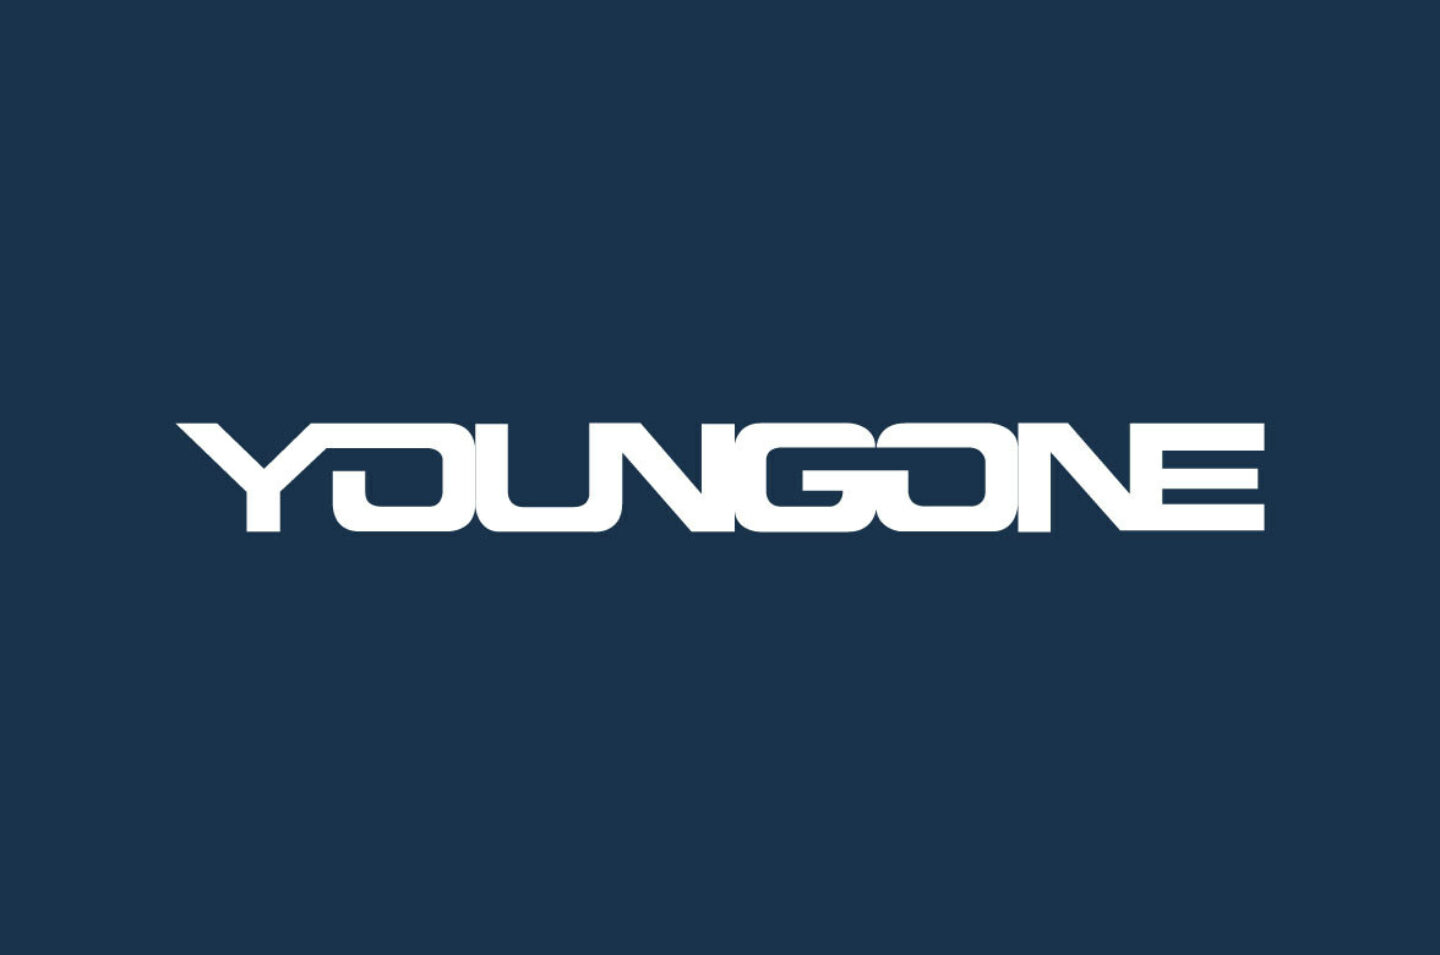 Youngone logo